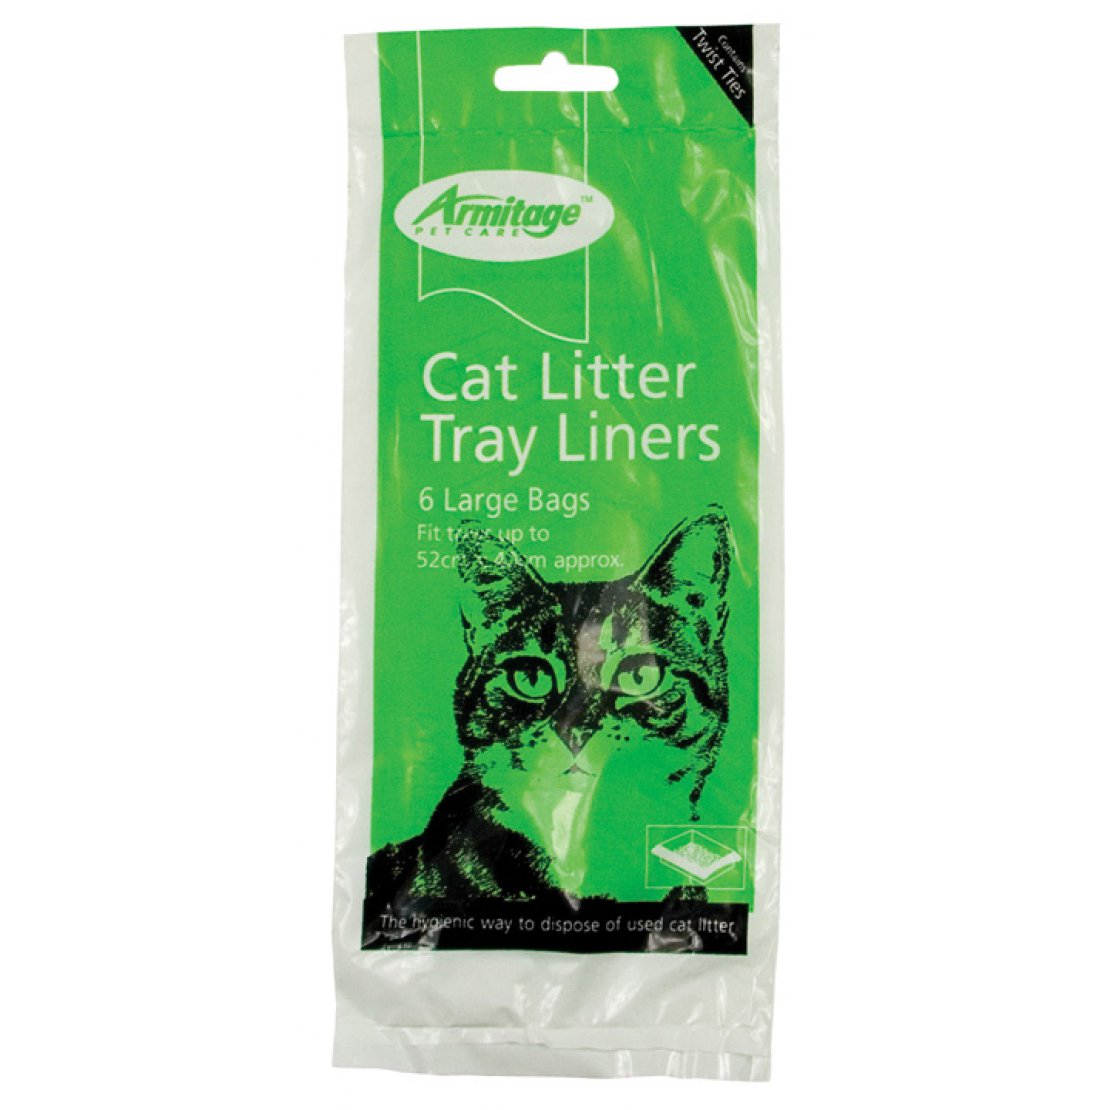 Armitage Litter Tray Liners